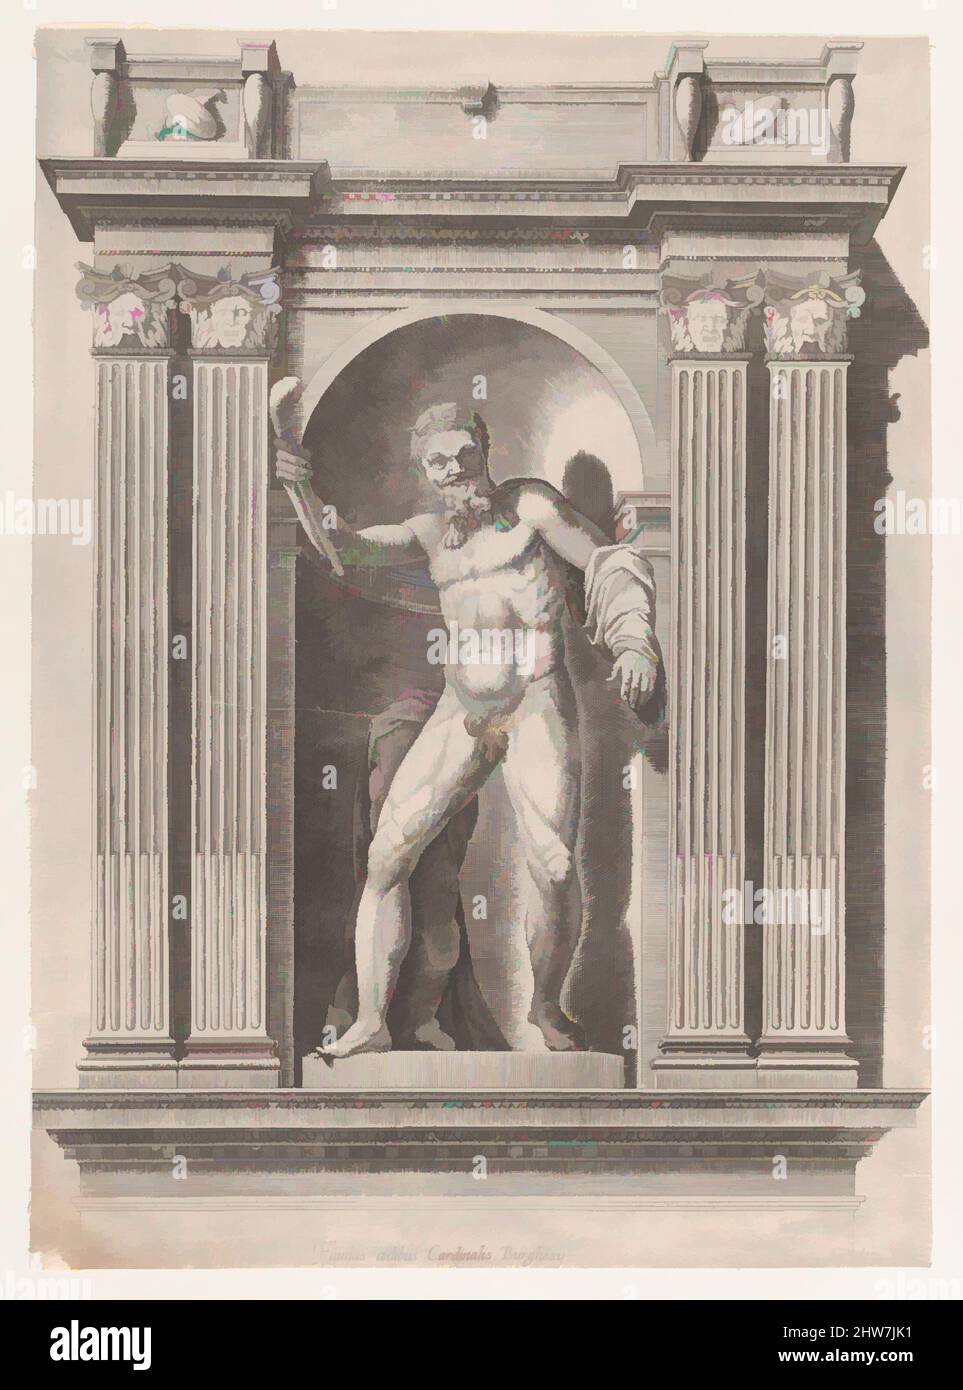 Art inspired by Speculum Romanae Magnificentiae: Sculpture of a faun standing in a niche after a statue in Scipione Borghese's villa, 16th century, Etching, sheet: 16 3/8 x 11 13/16 in. (41.6 x 30 cm), Prints, Anonymous, Classic works modernized by Artotop with a splash of modernity. Shapes, color and value, eye-catching visual impact on art. Emotions through freedom of artworks in a contemporary way. A timeless message pursuing a wildly creative new direction. Artists turning to the digital medium and creating the Artotop NFT Stock Photo